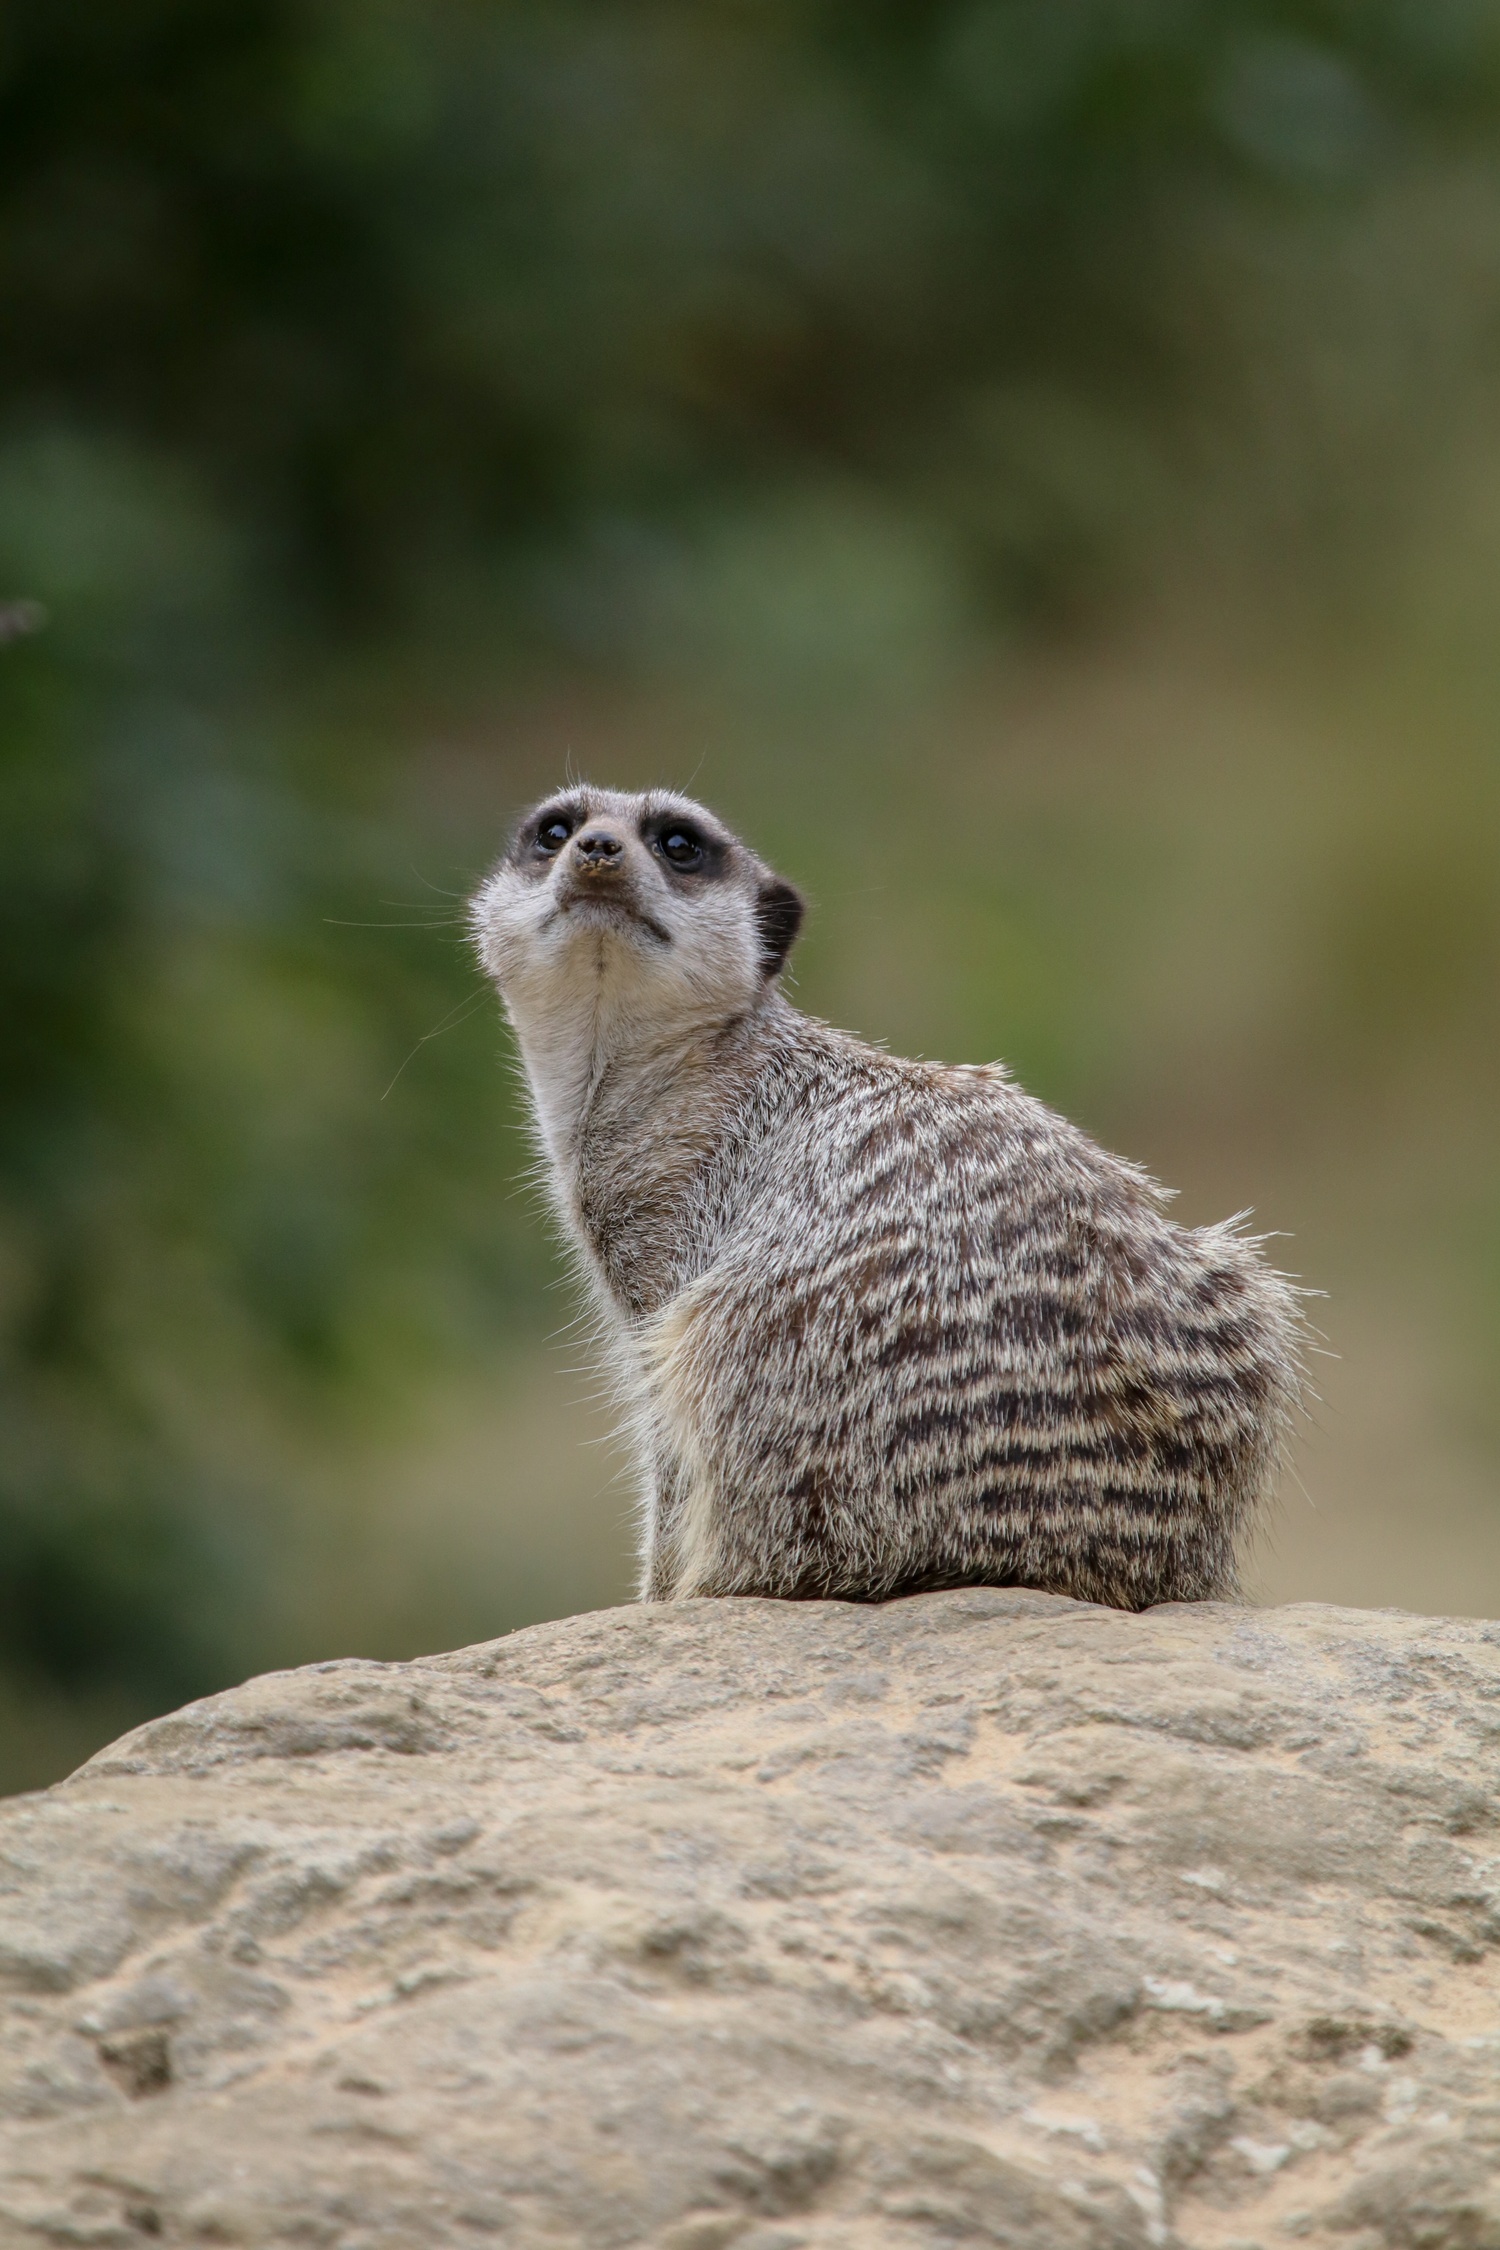 Meerkat sat on rock with body facing away from camera and head turns in general direction of camera